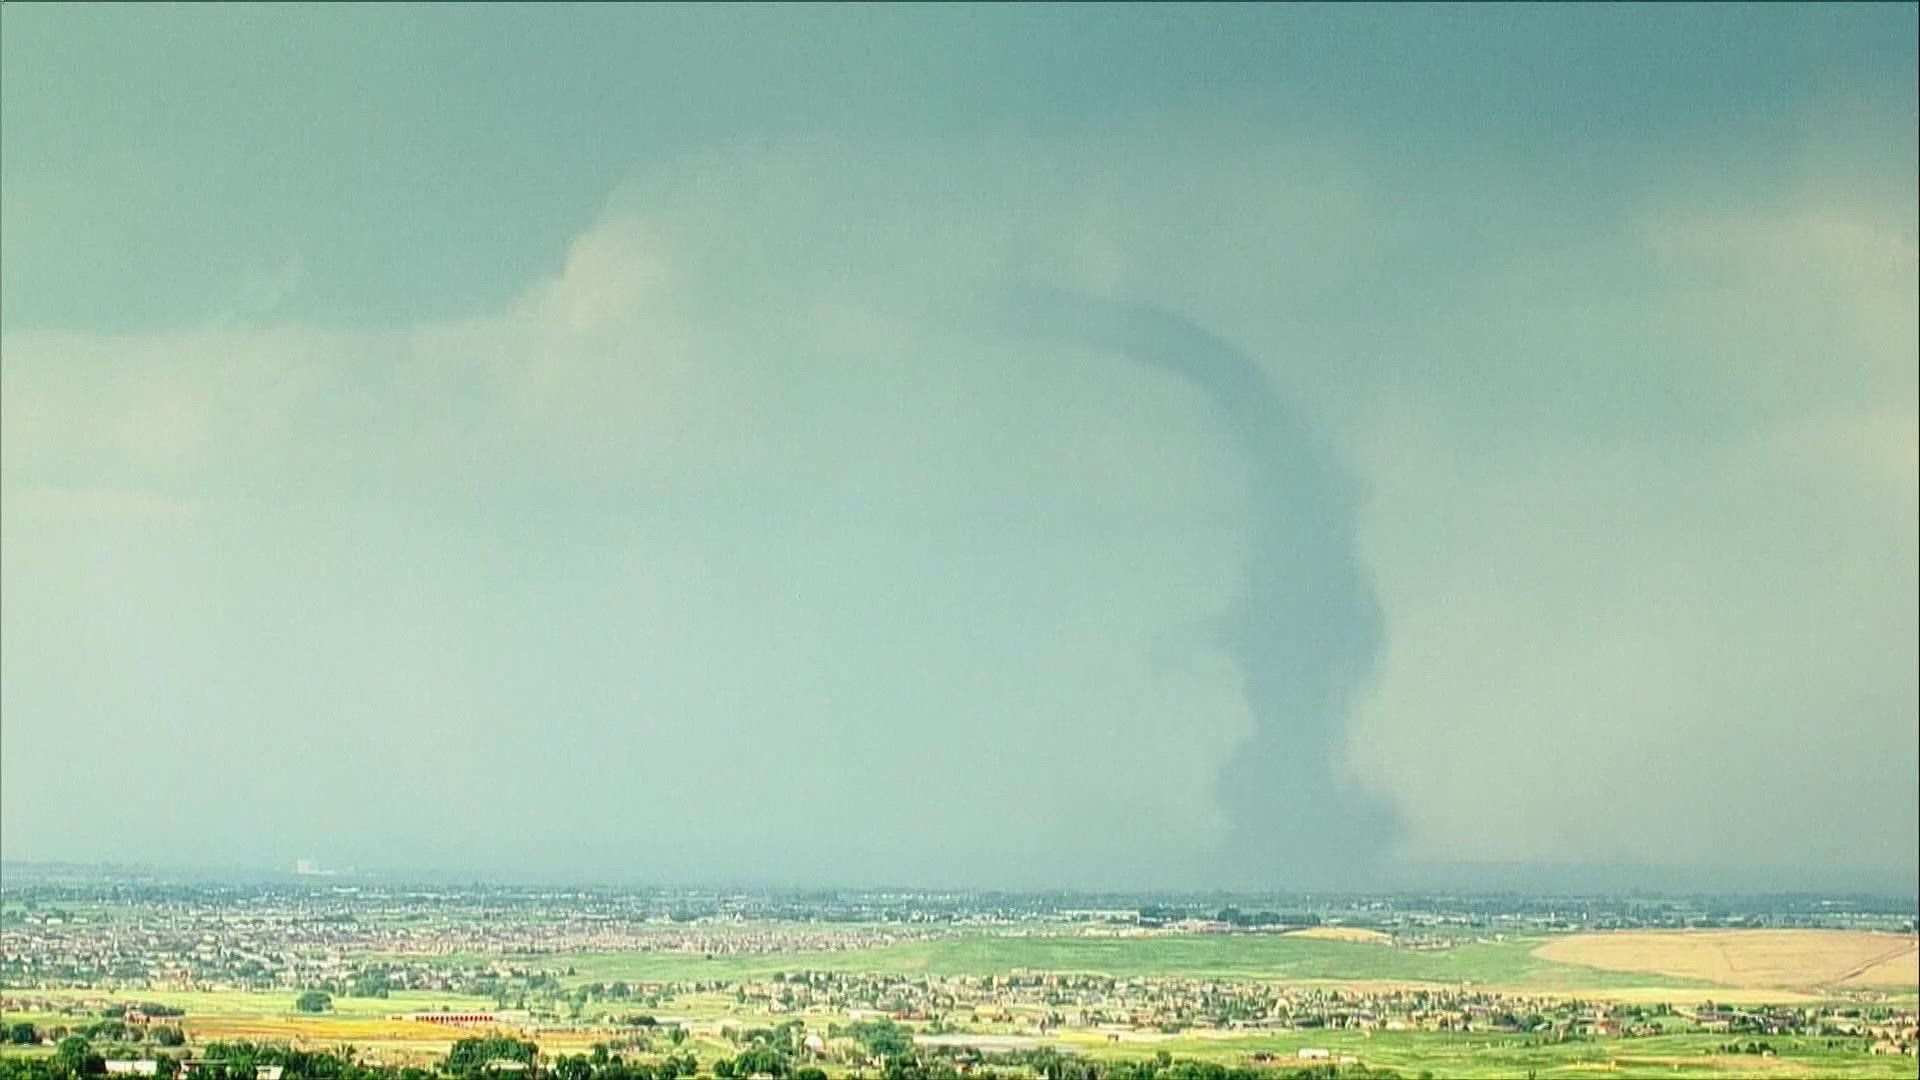 Colorado reported its first tornado of the year yesterday. Colorado gets the 8th most tornadoes in the country. Meteorologist Cory Reppenhagen explains the numbers.